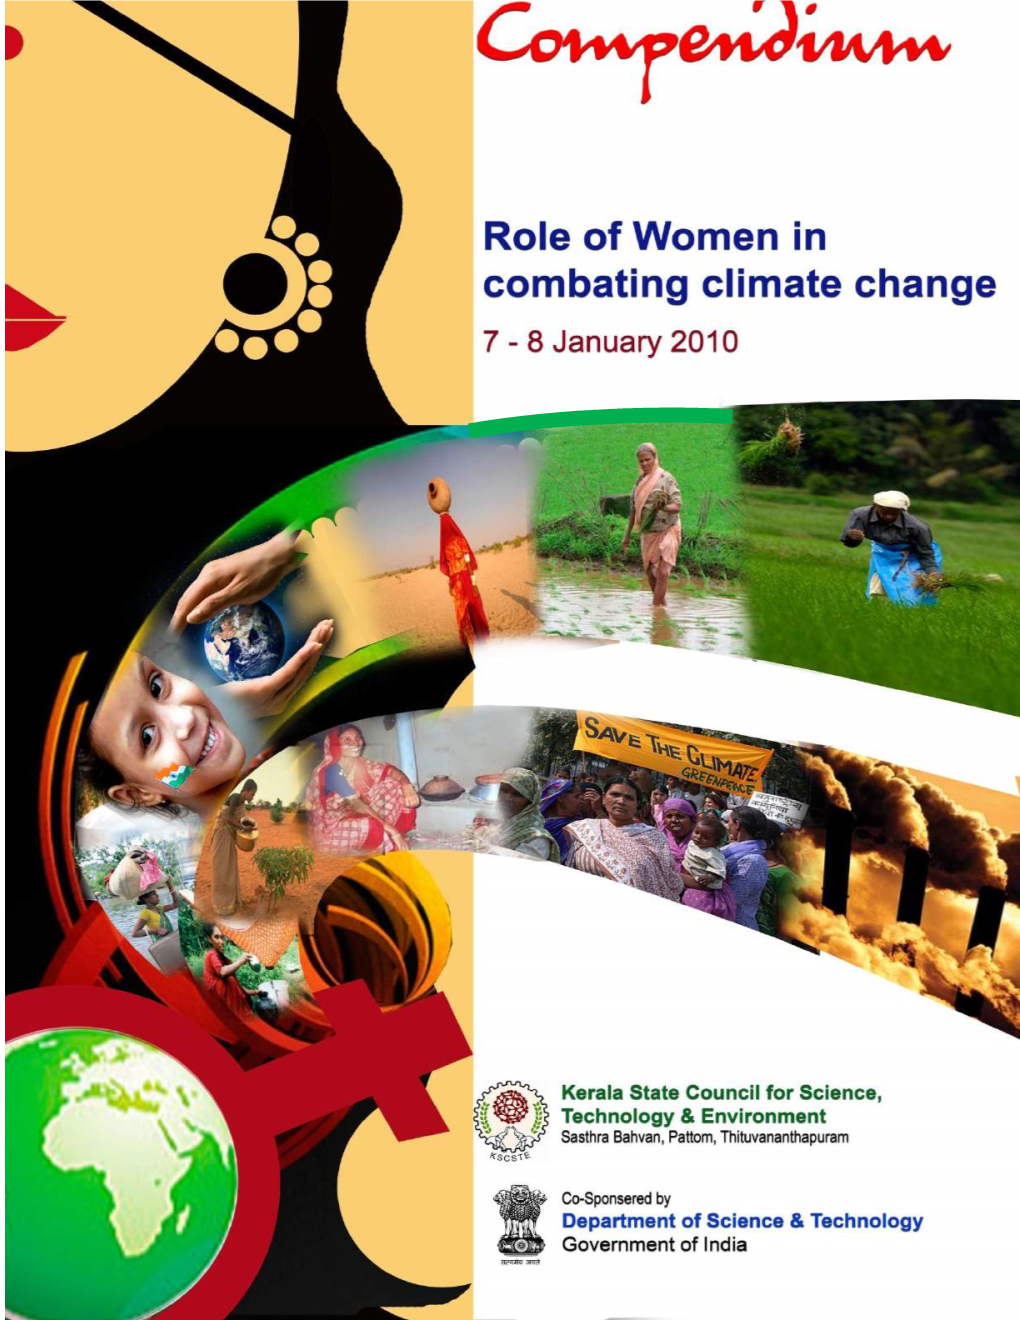 Role of Women in Combating Climate Change”